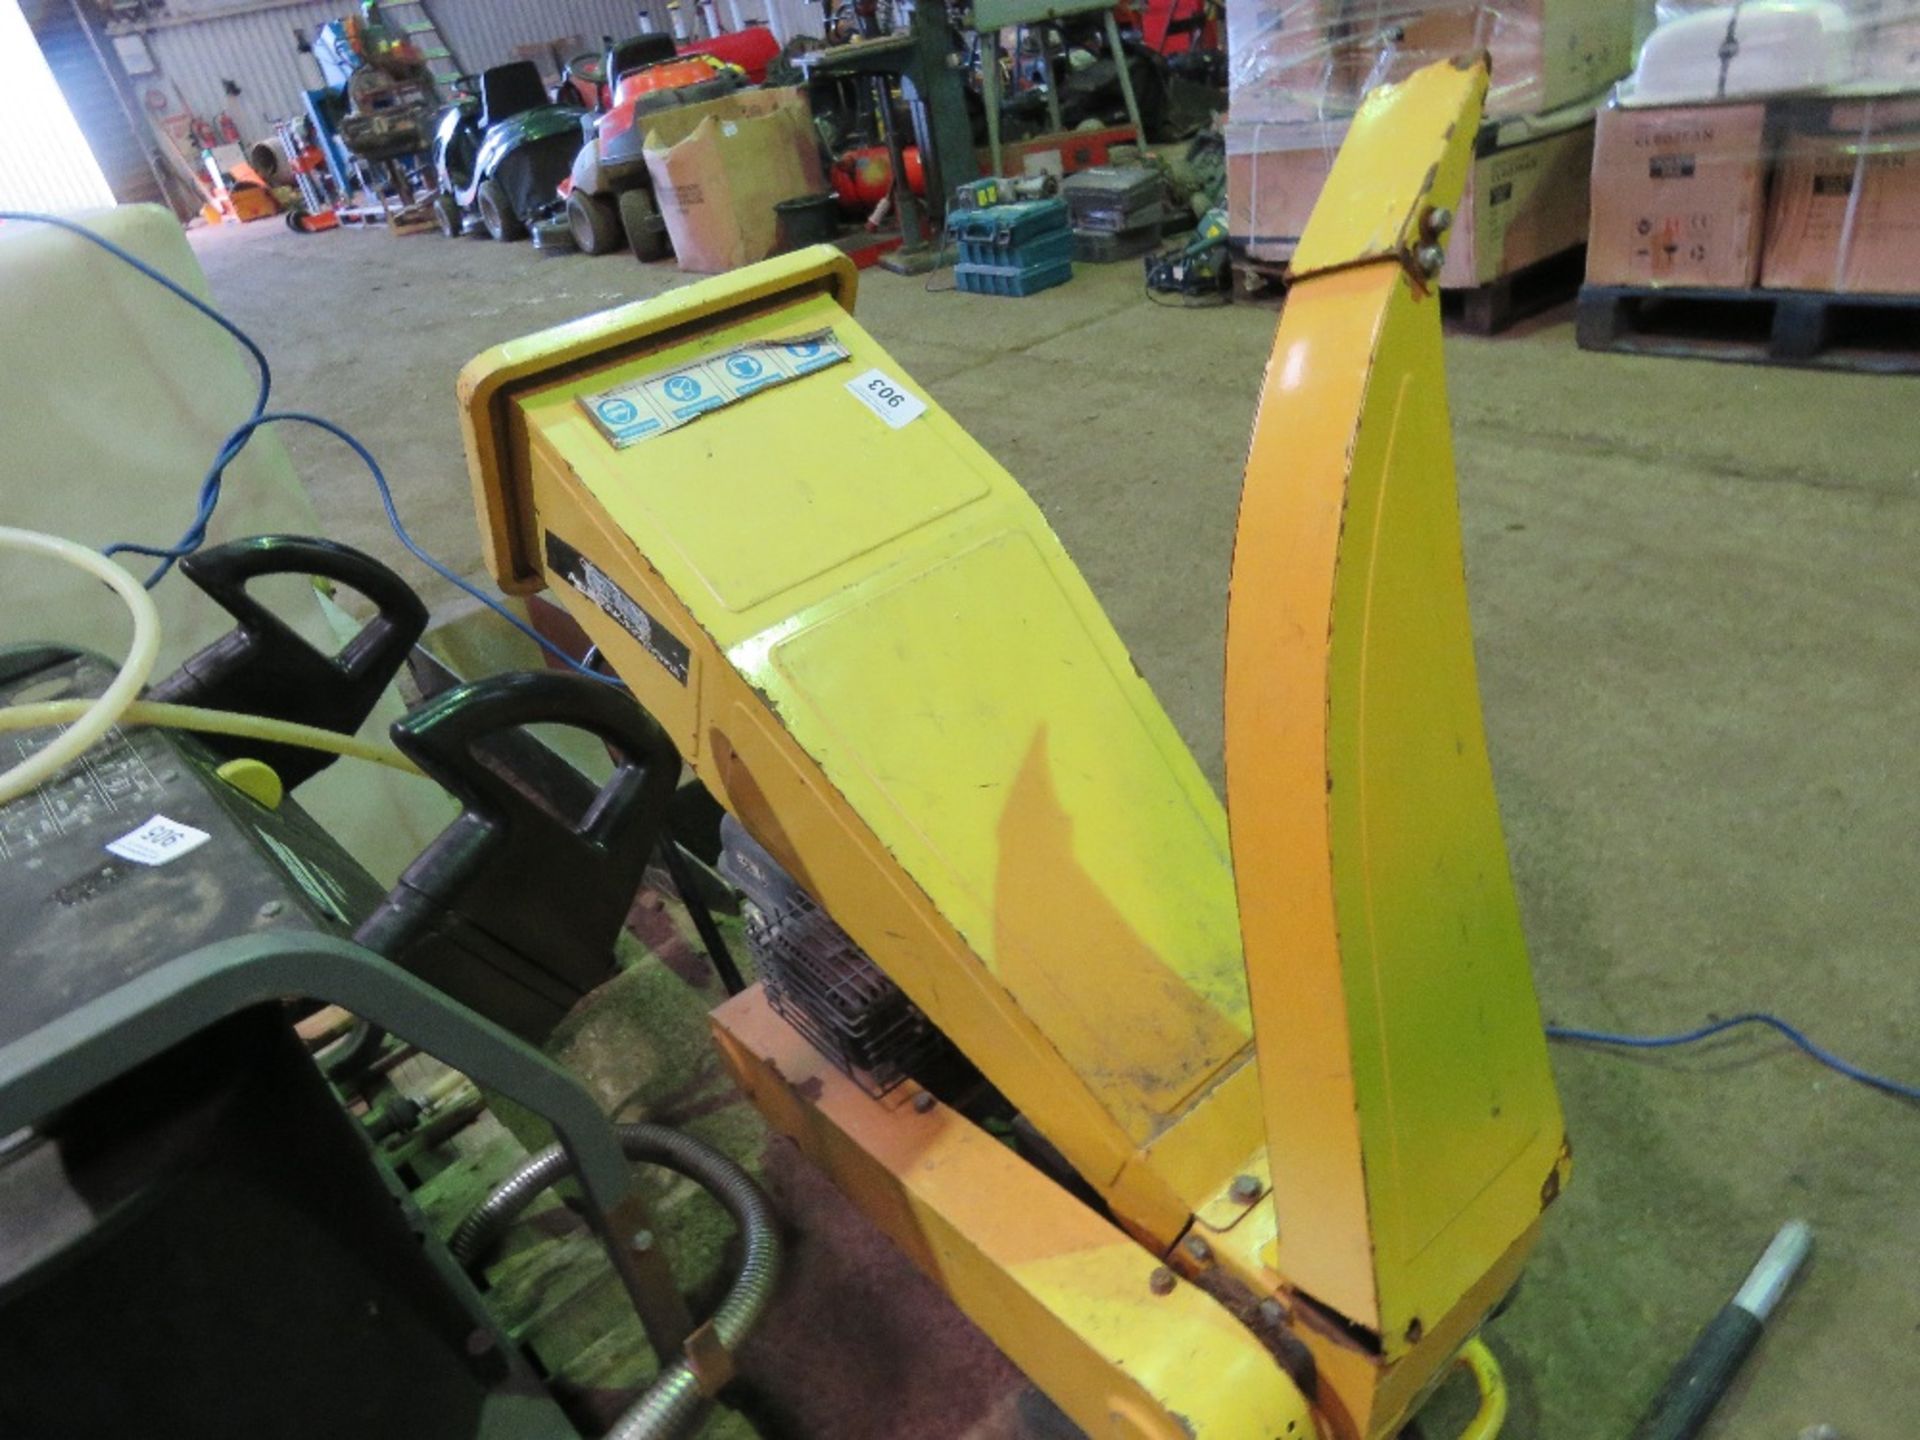 PETROL ENGINED GARDEN SHREDDER. THIS LOT IS SOLD UNDER THE AUCTIONEERS MARGIN SCHEME, THEREFORE NO - Image 3 of 3